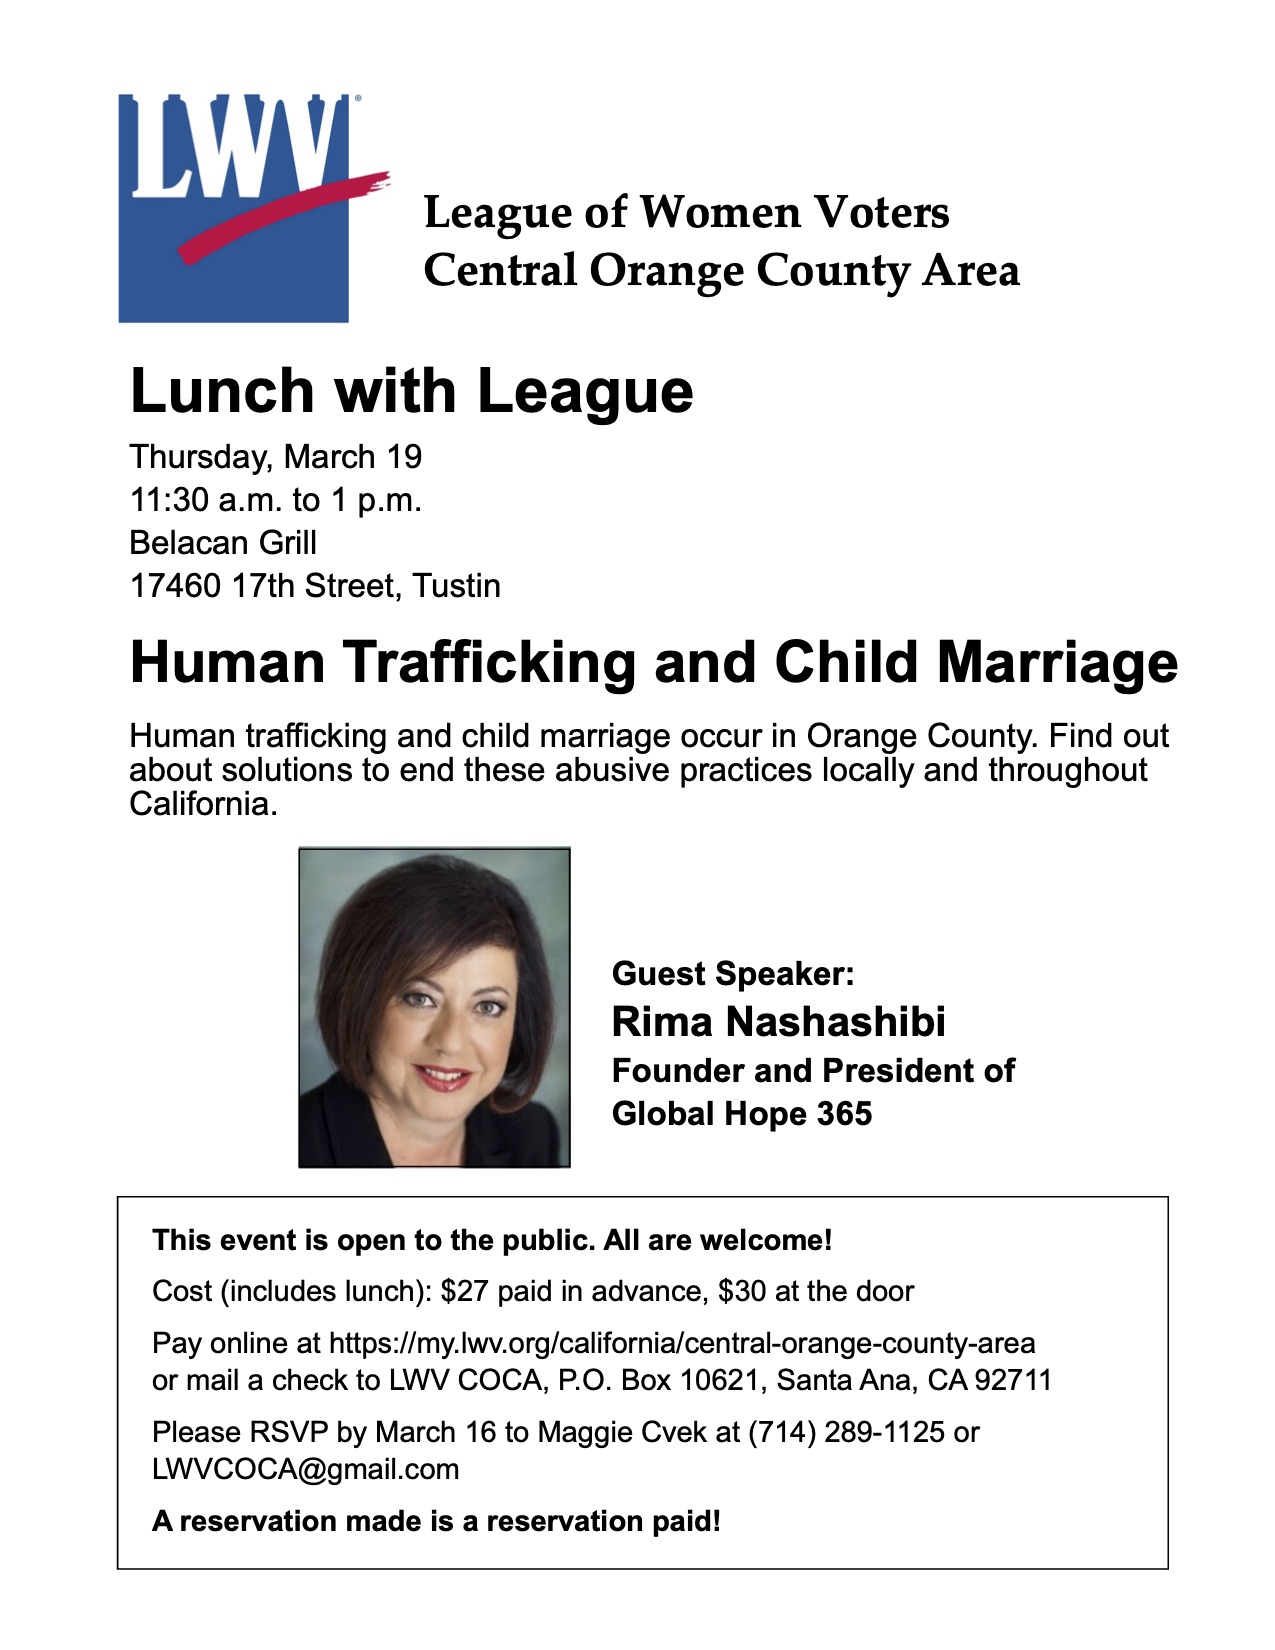 Lunch with League Human Trafficking and Child Marriage